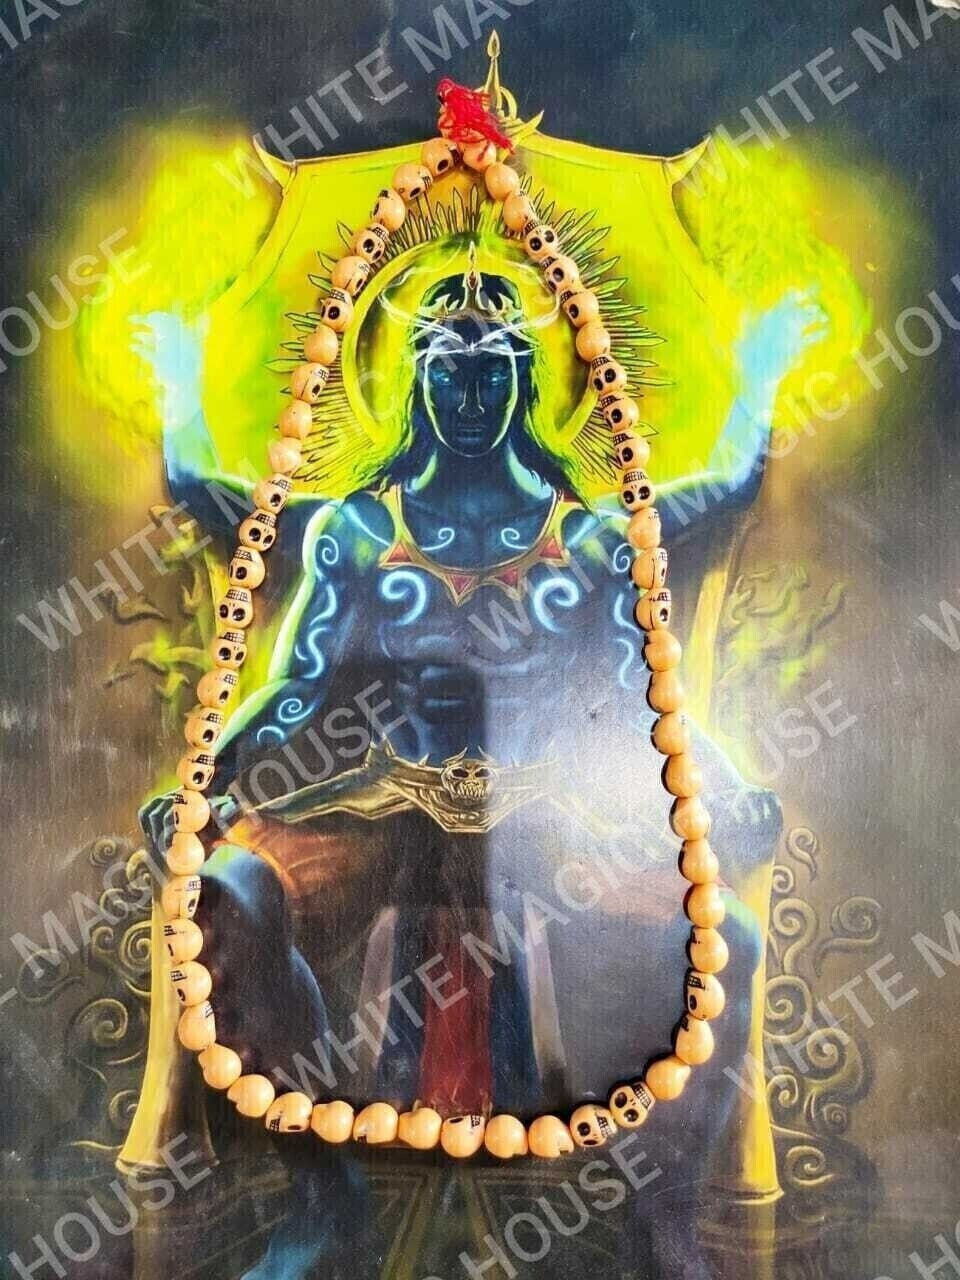 Real Aghori Made Kali Ashta Siddhi Necklace - Obtain 7 Occult Phic Powers A+++